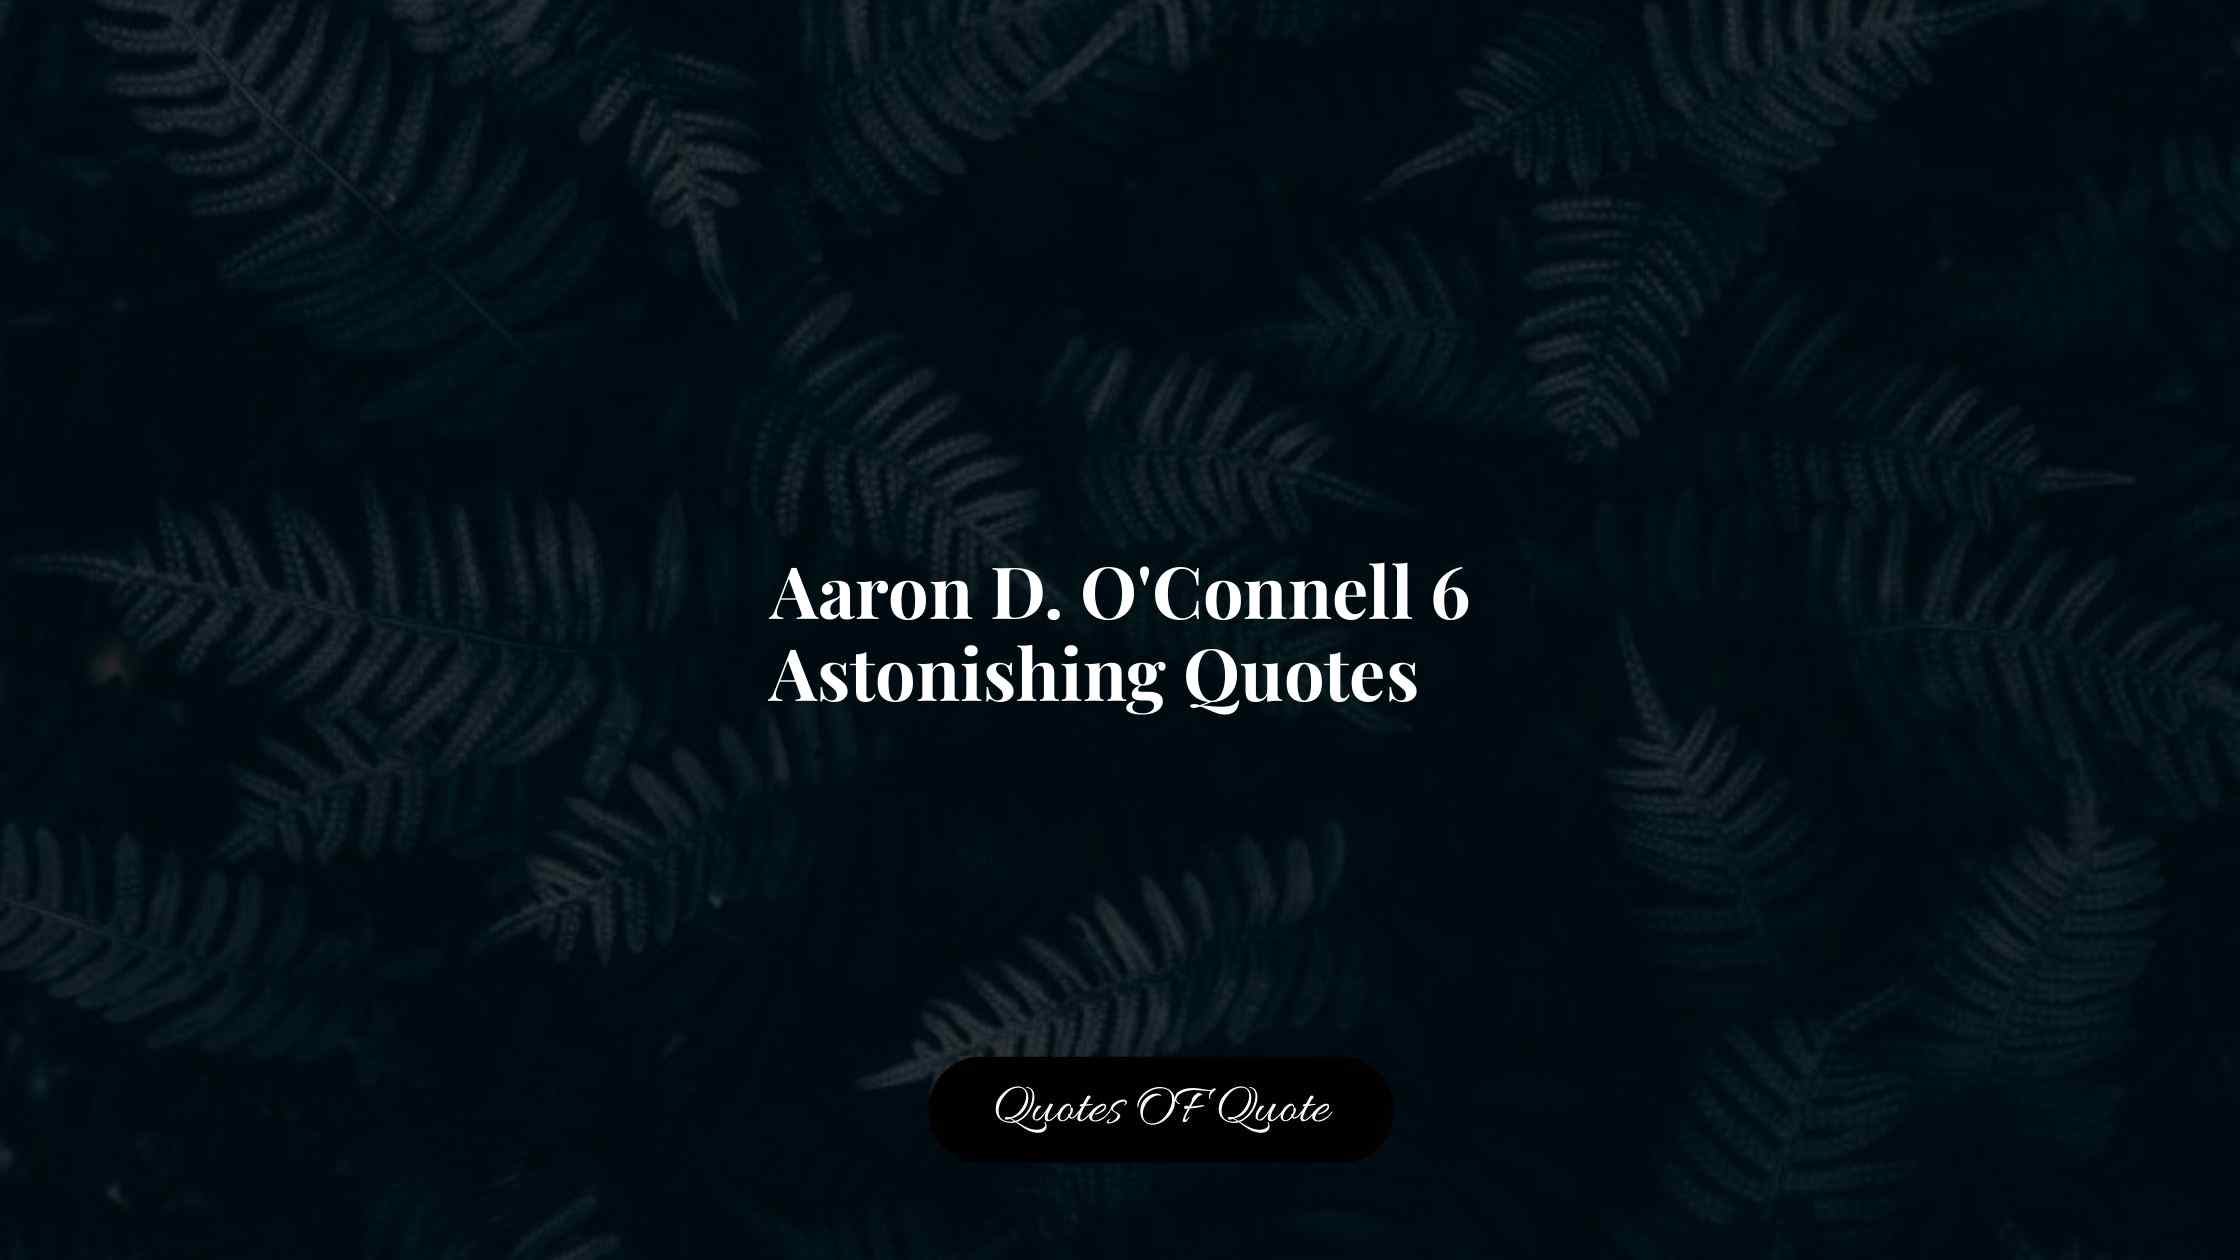 Aaron D. O'Connell 6 Astonishing Quotes